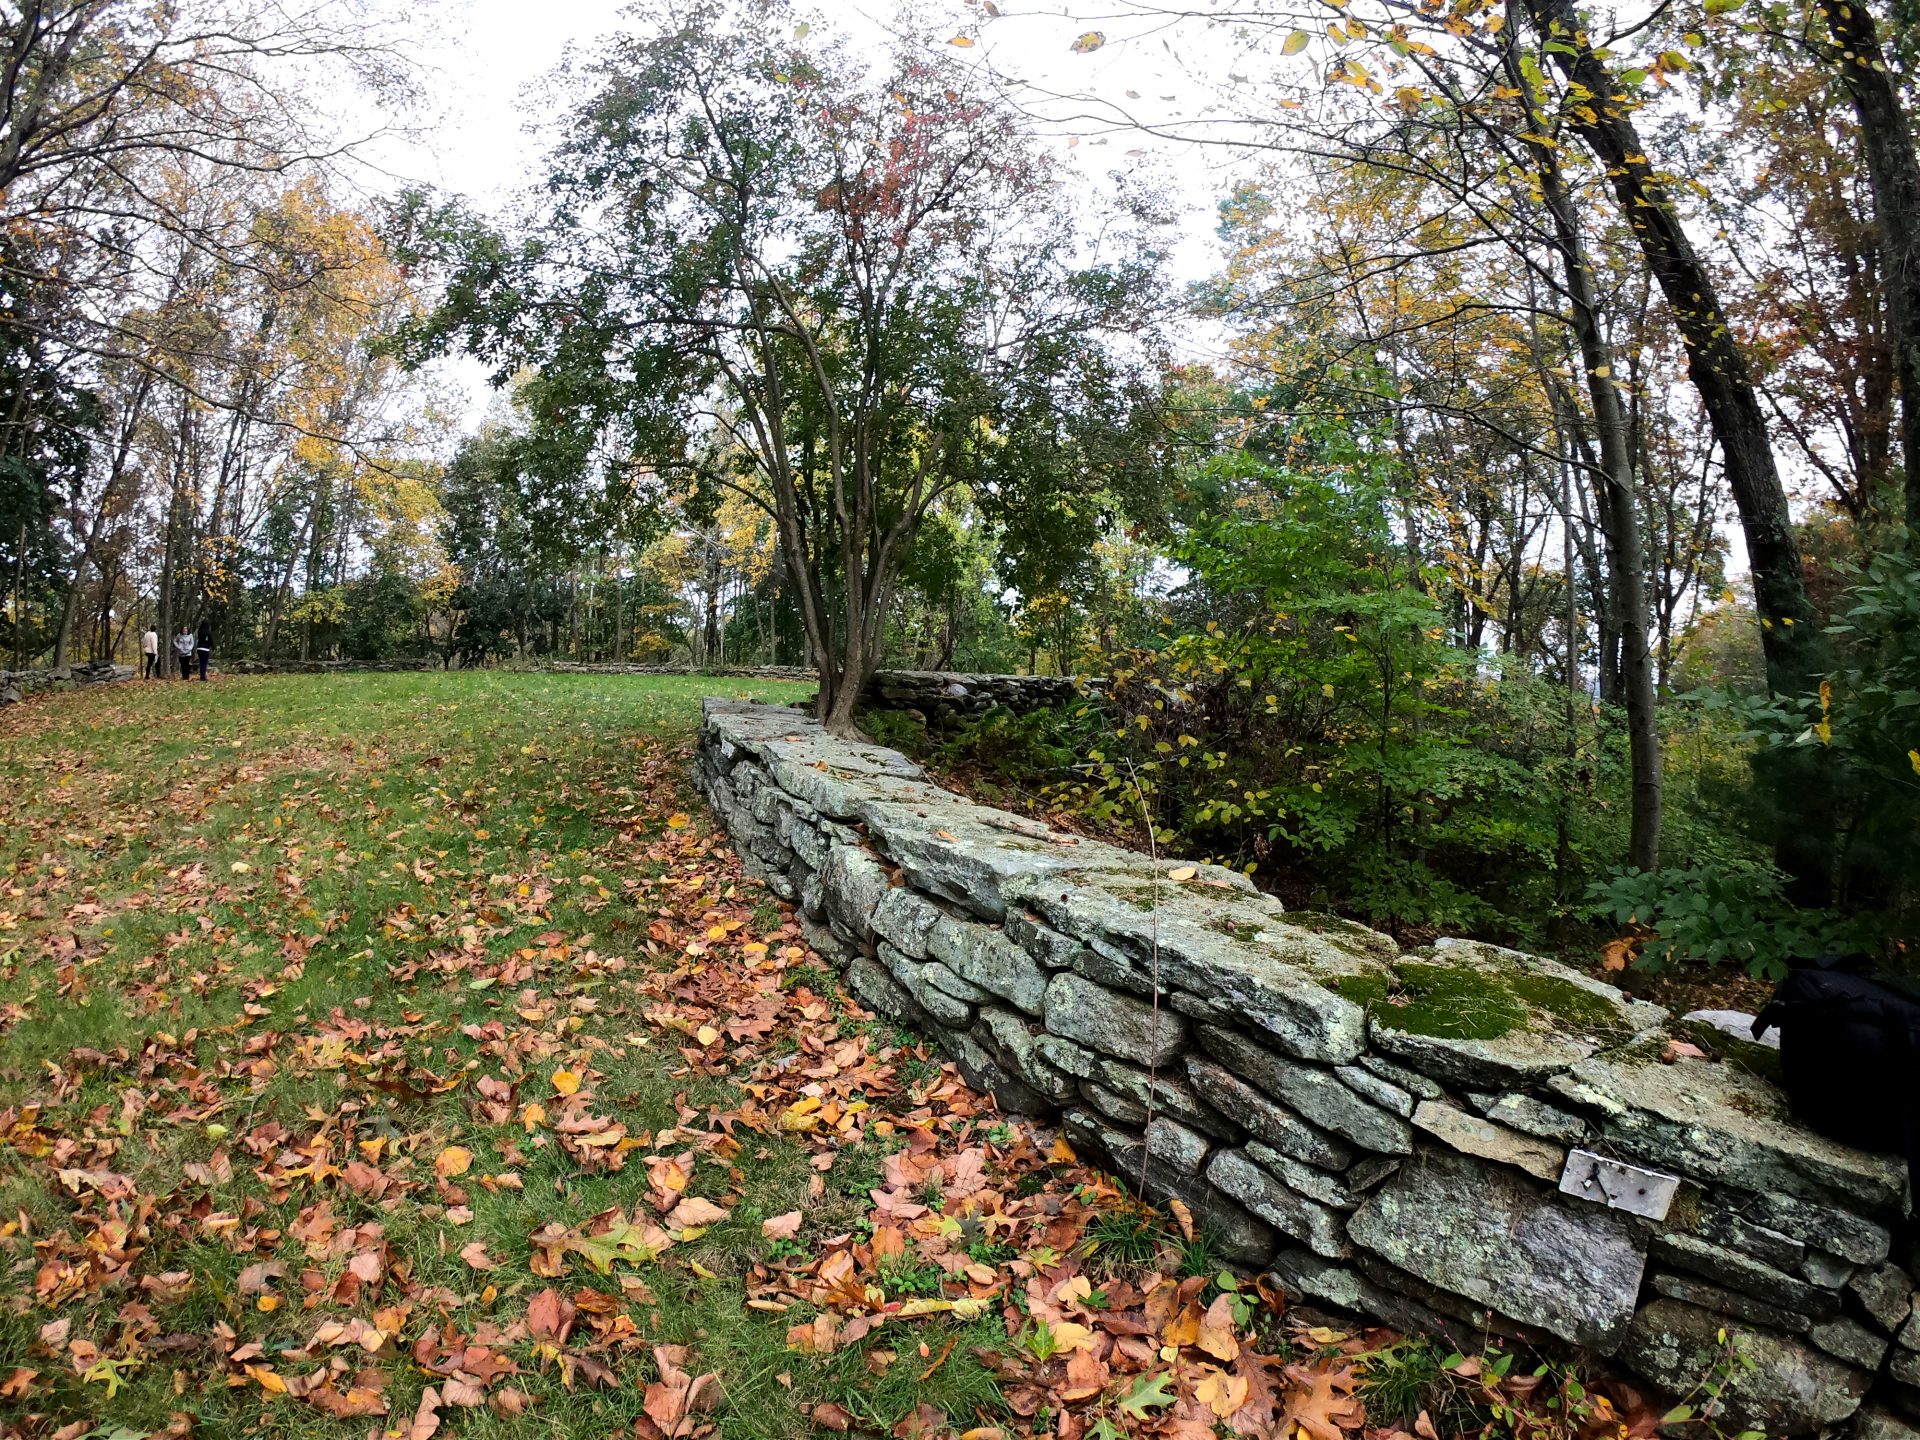 The Ridge campus grounds with outdoor grass area surrounded by stone wall and woods.